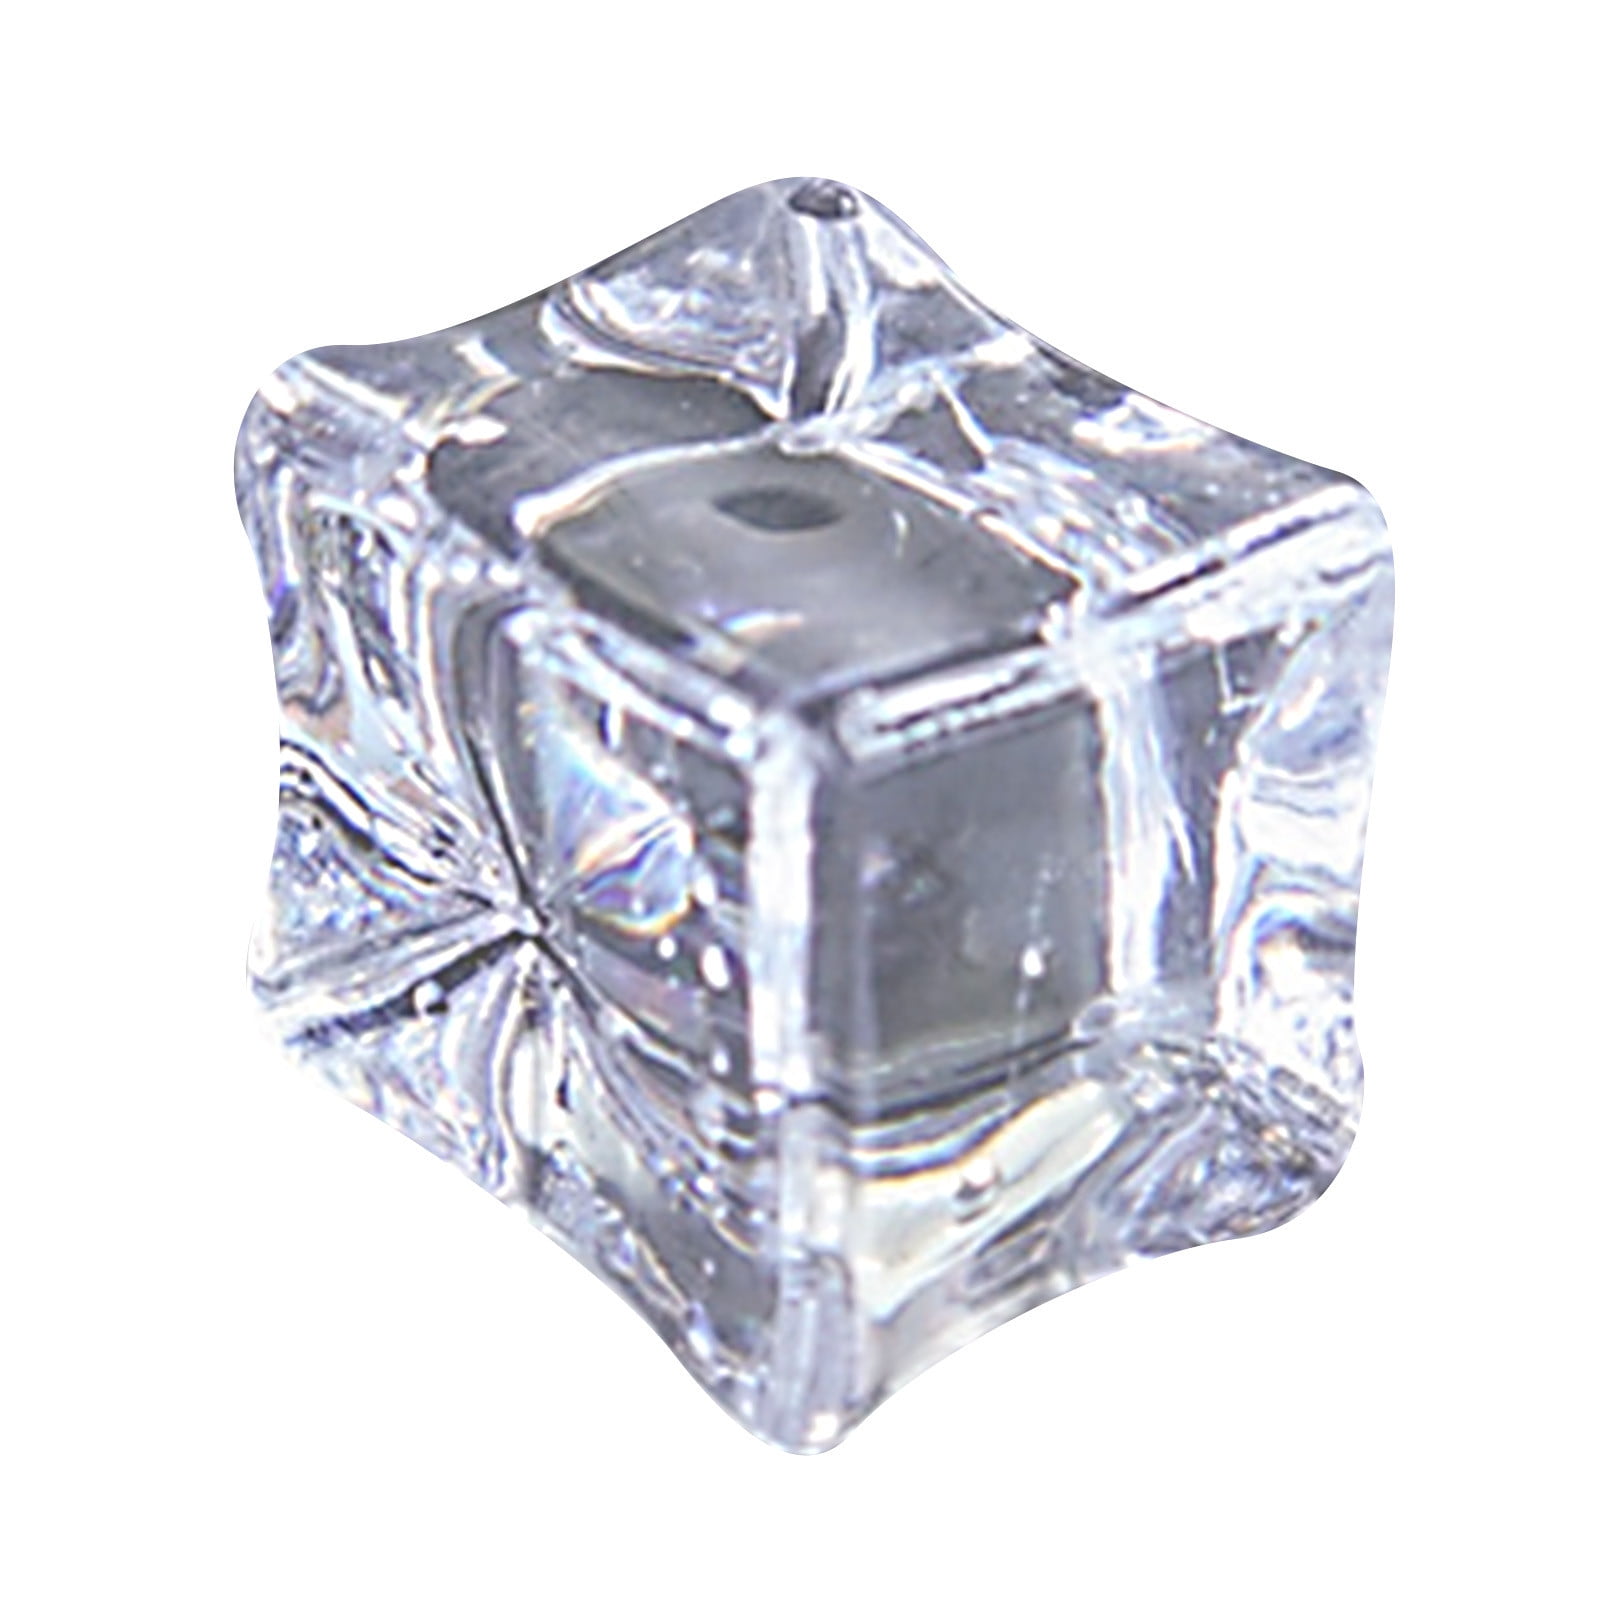 Details about   15Pcs/Pack Fake Artificial Acrylic Ice Cubes Crystal 2x2cm Square Party Wedding 